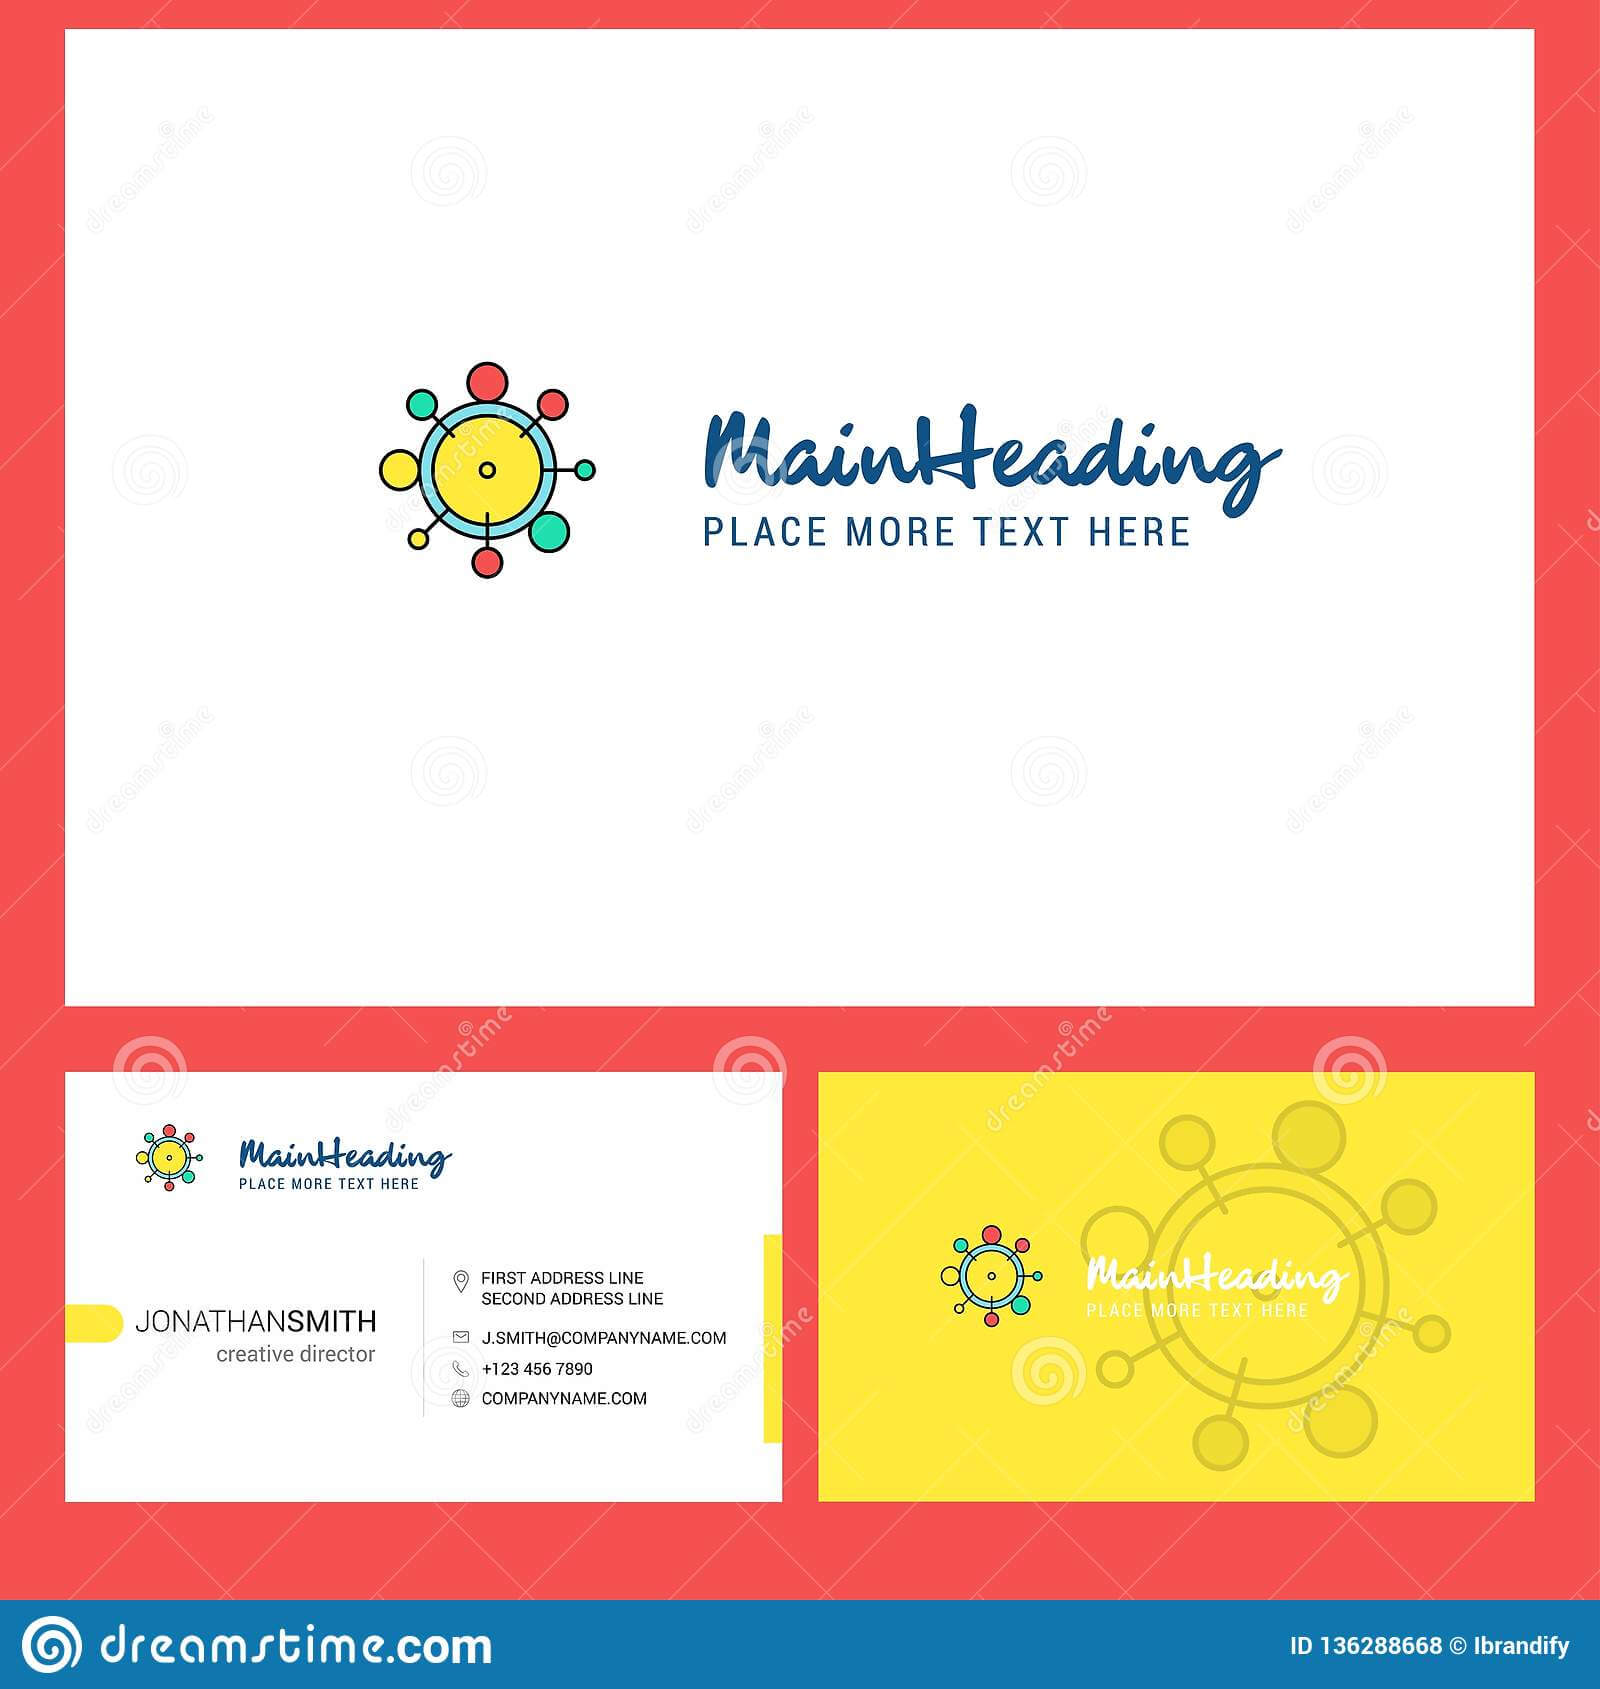 Chemical Bonding Logo Design With Tagline & Front And Back Within Medication Card Template